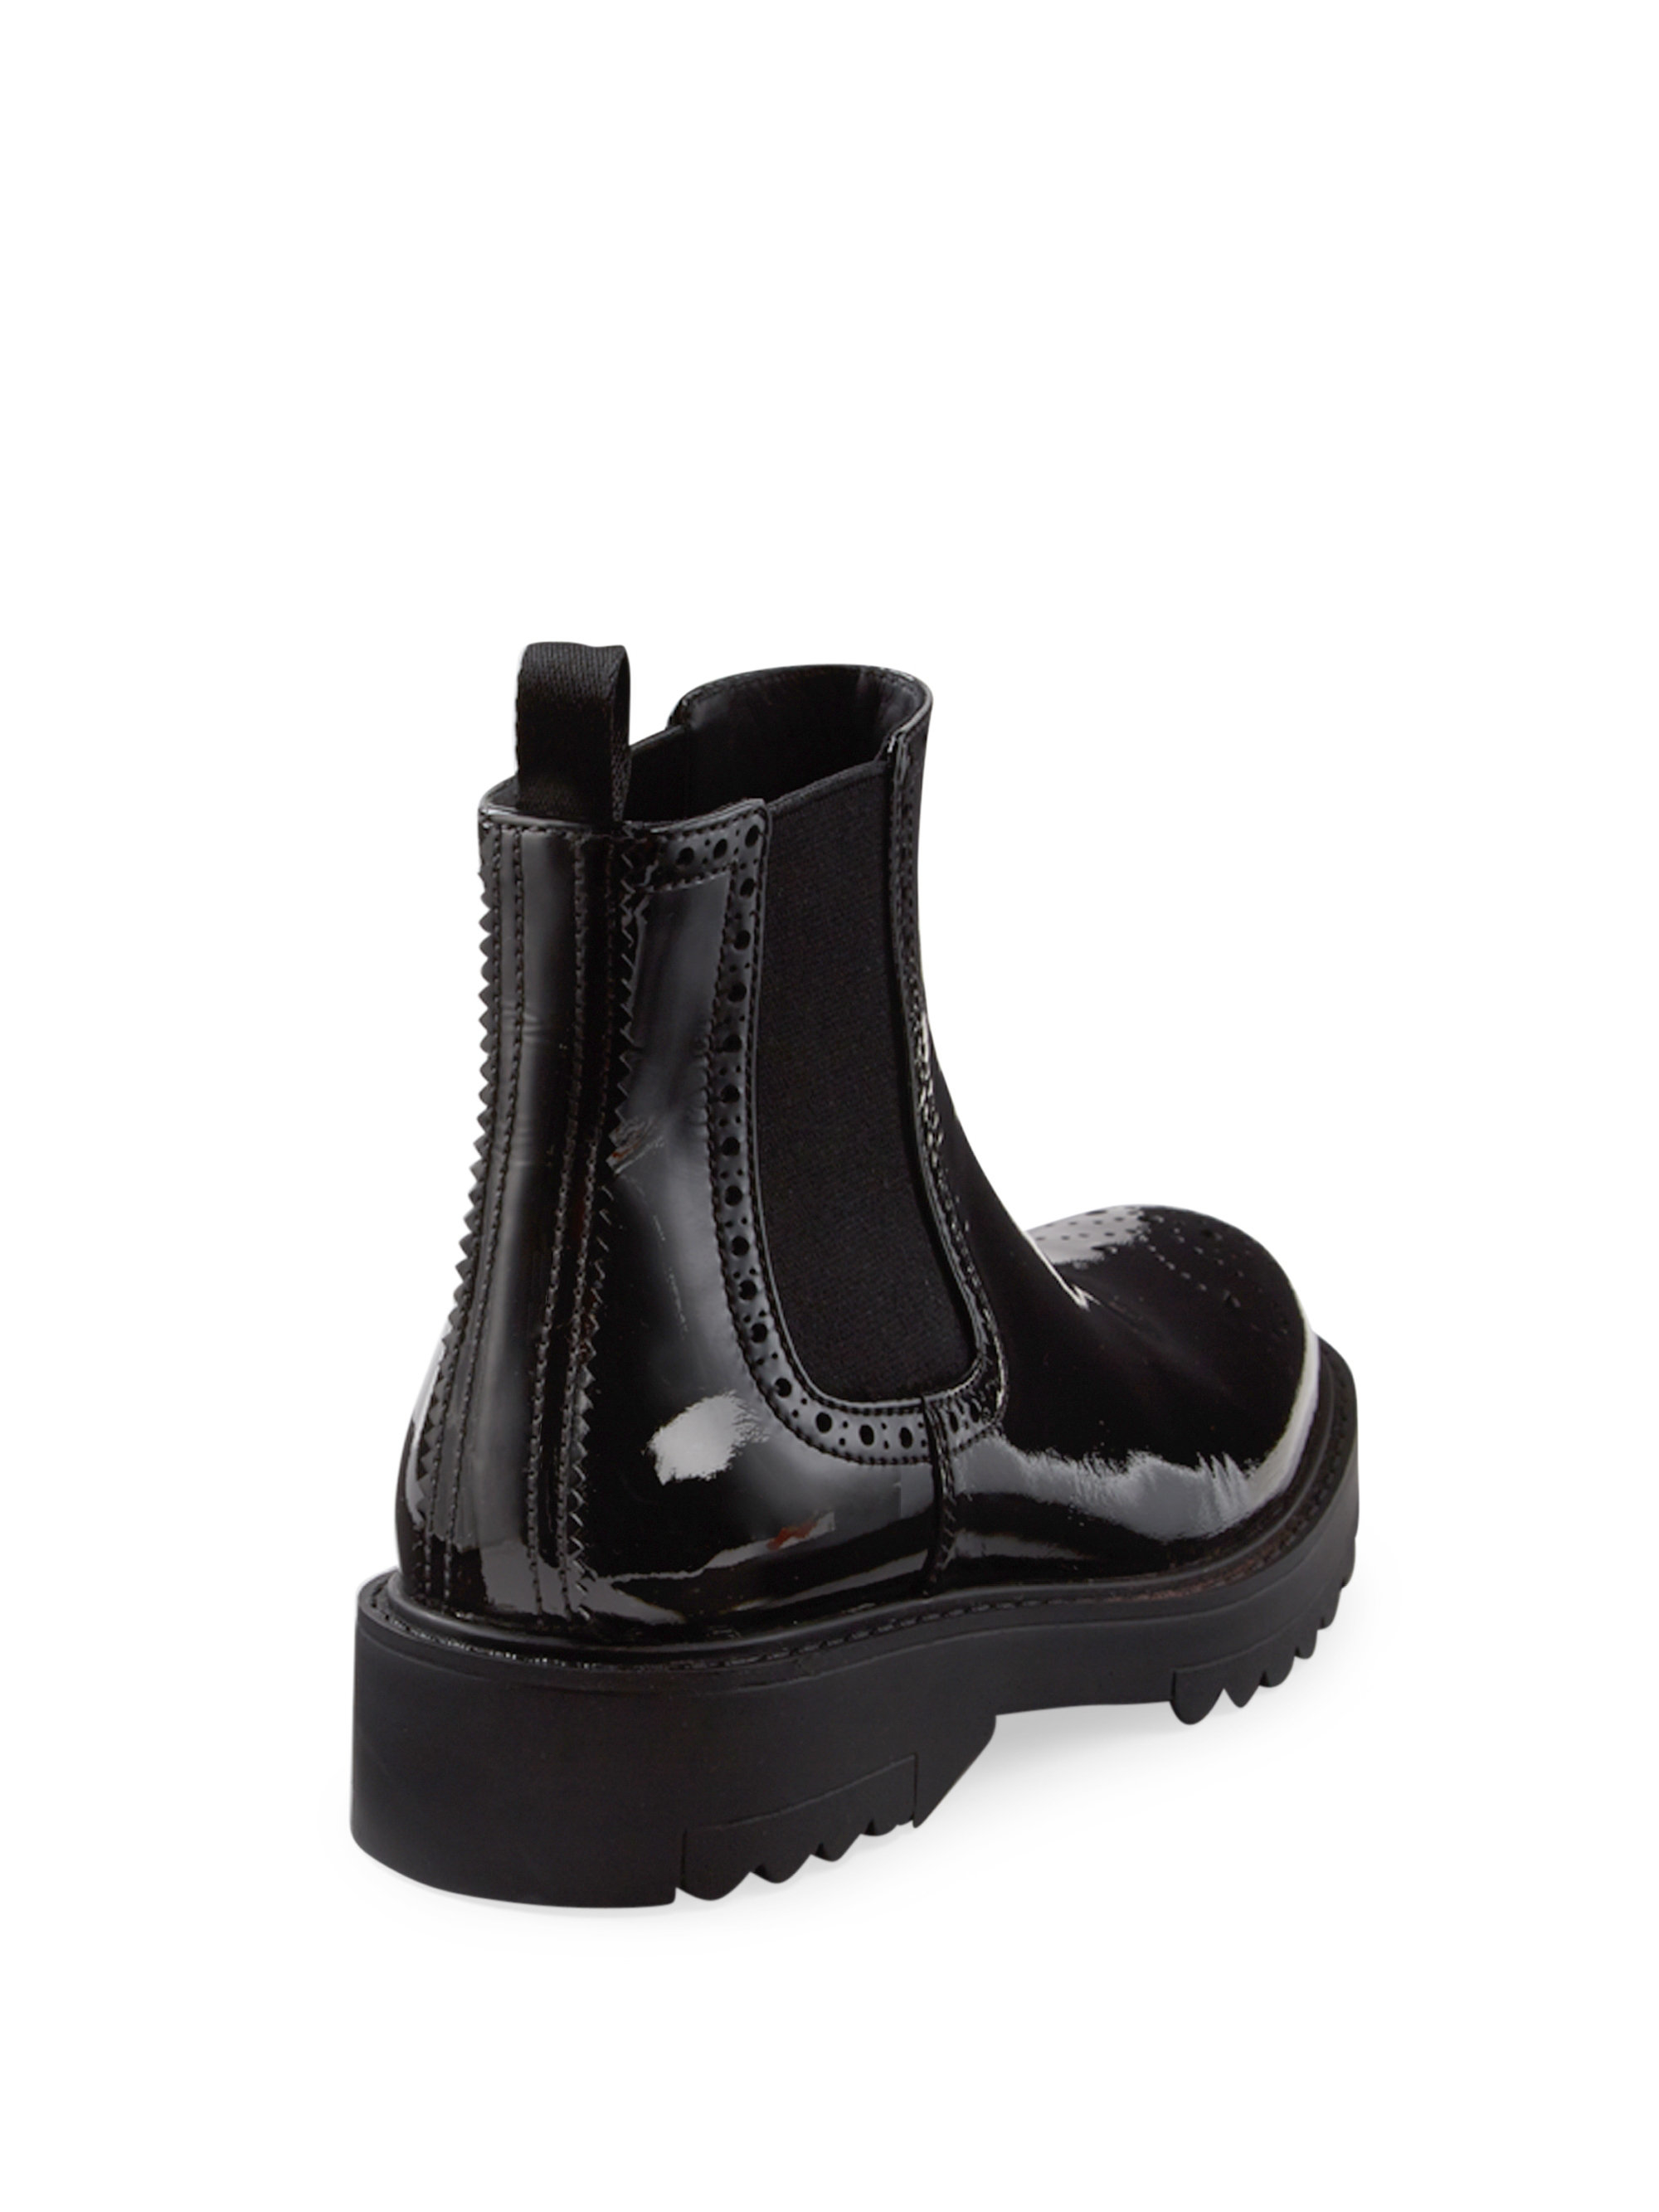 Prada Patent Leather Brogue Chelsea Boots in Black - Lyst